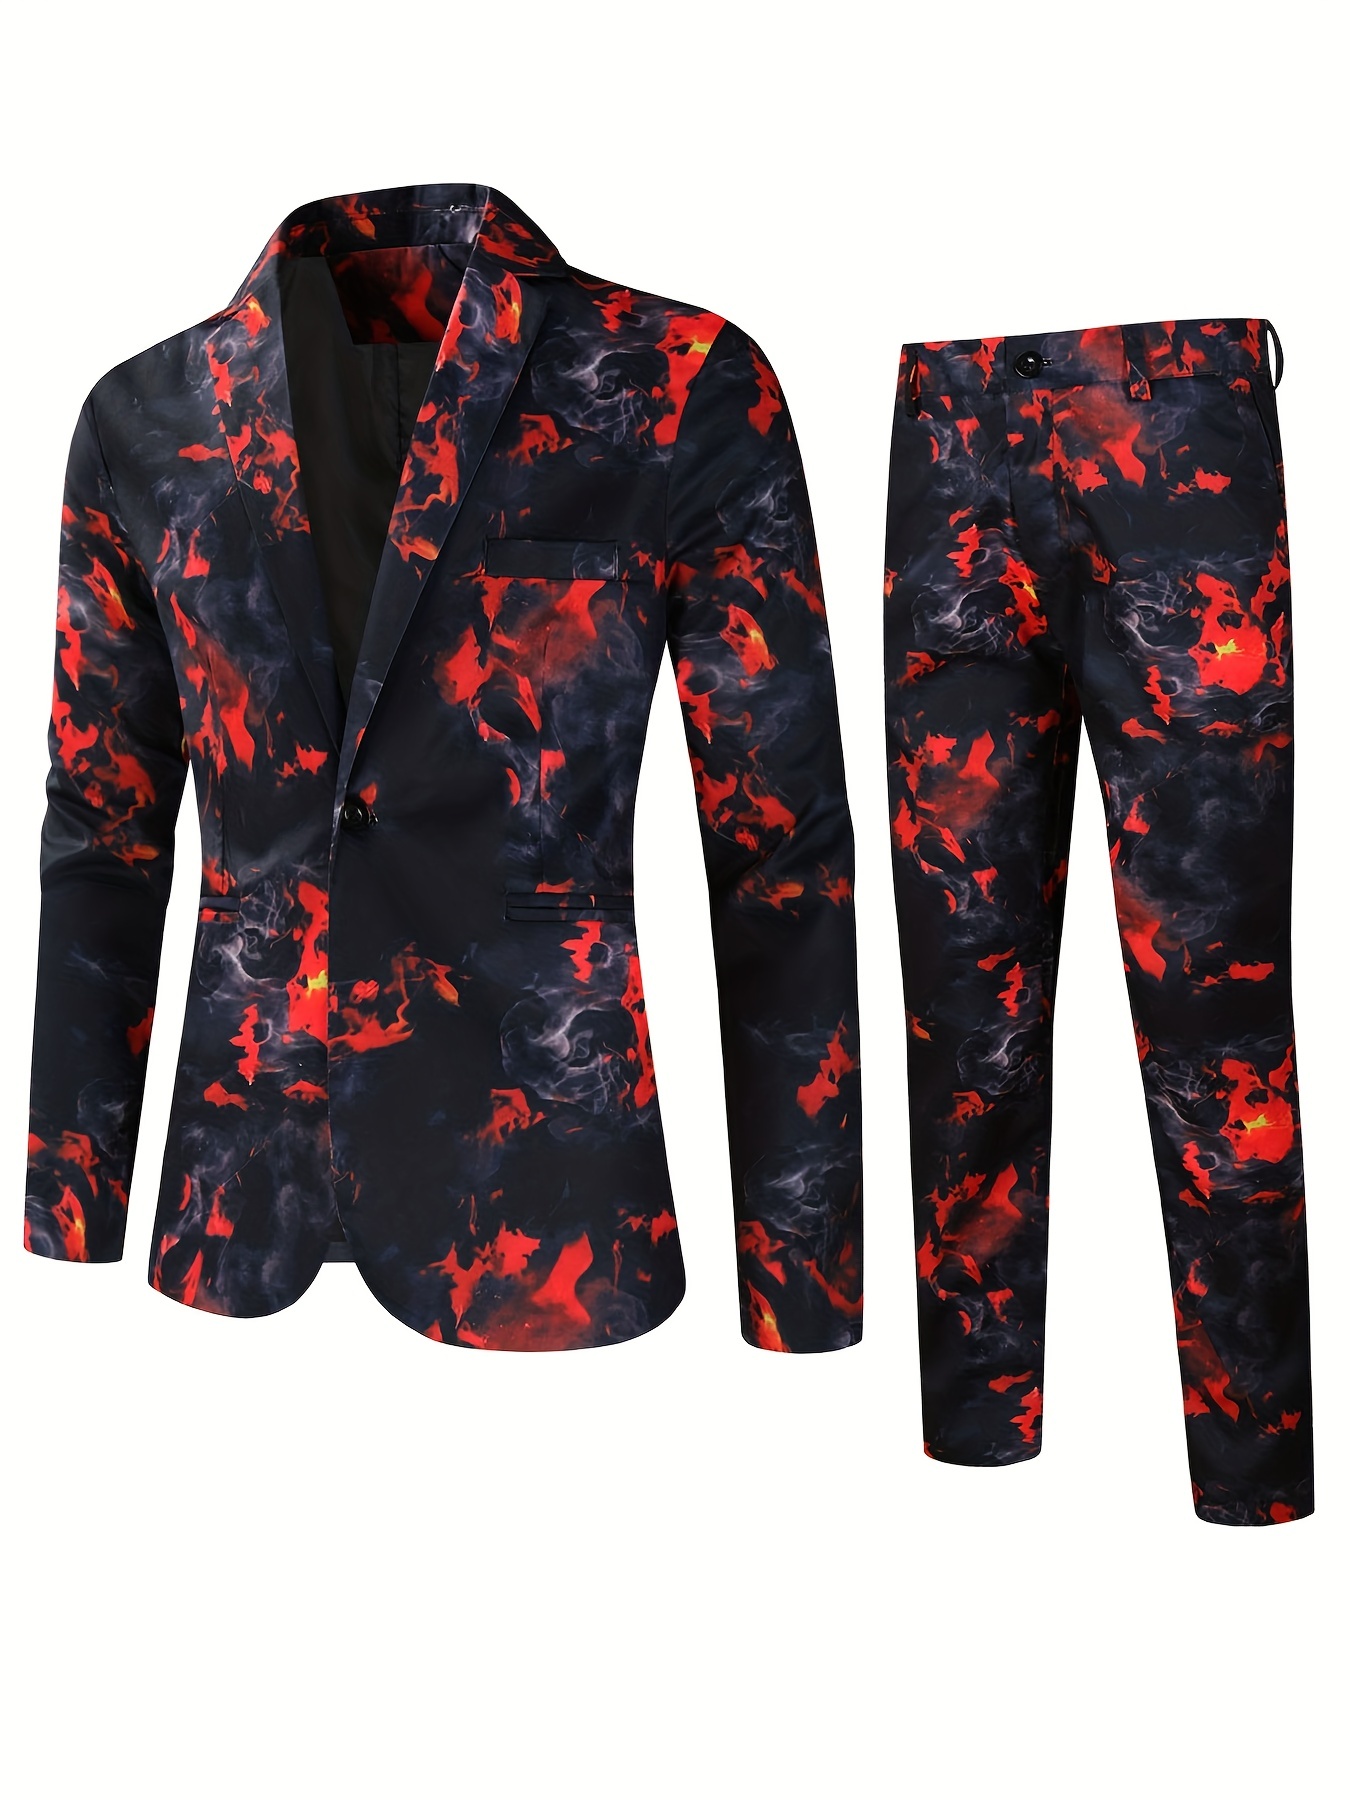 rose full body print mens business suit trendy suit jacket and formal business trousers